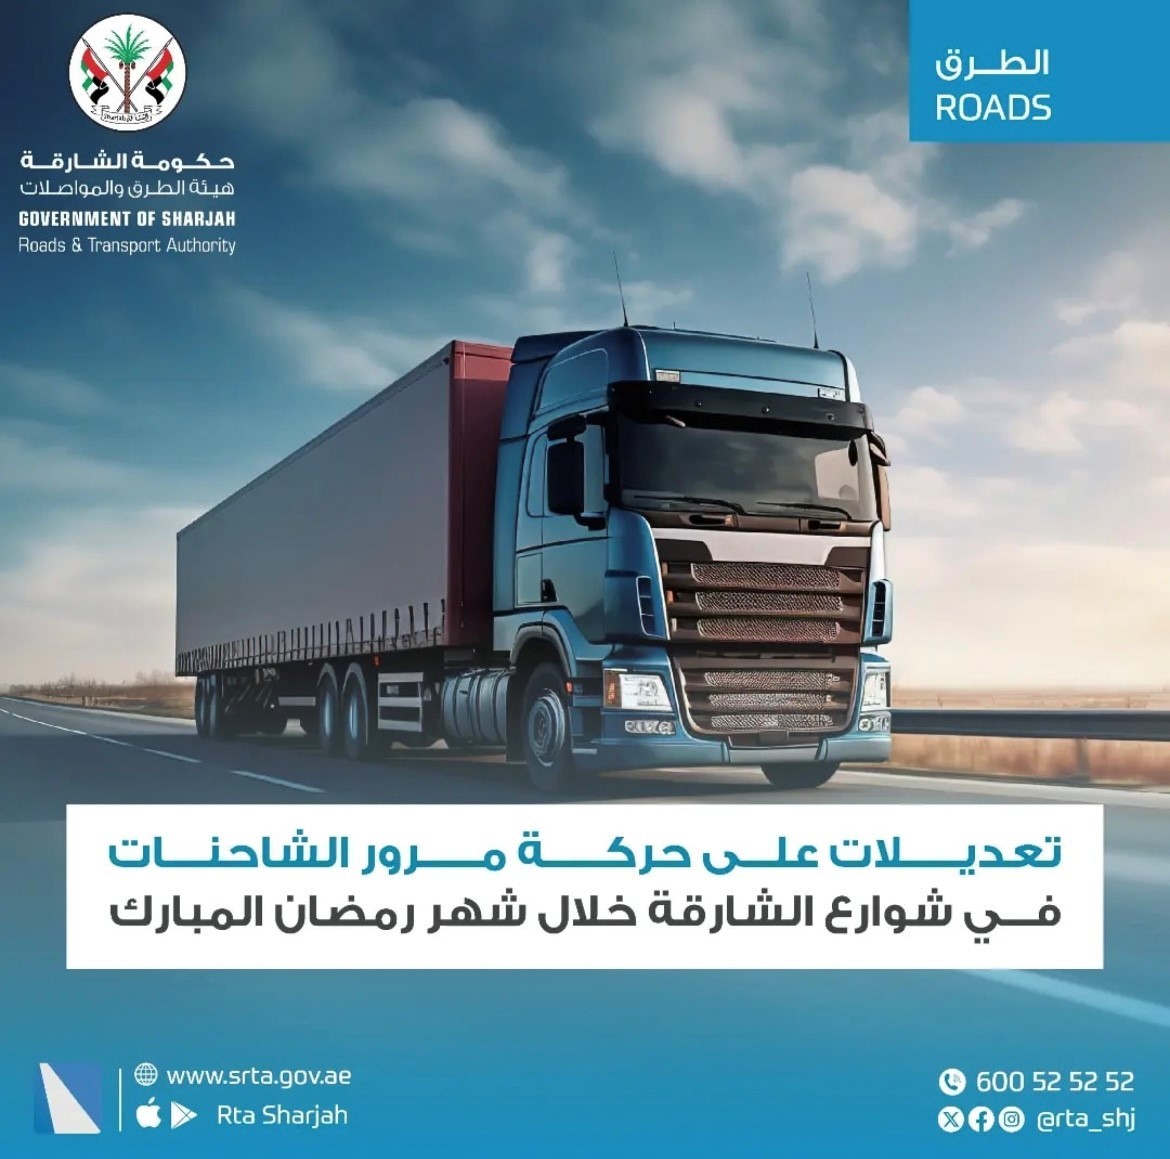 Amendment to truck traffic on the streets of Sharjah during the holy month of Ramadan